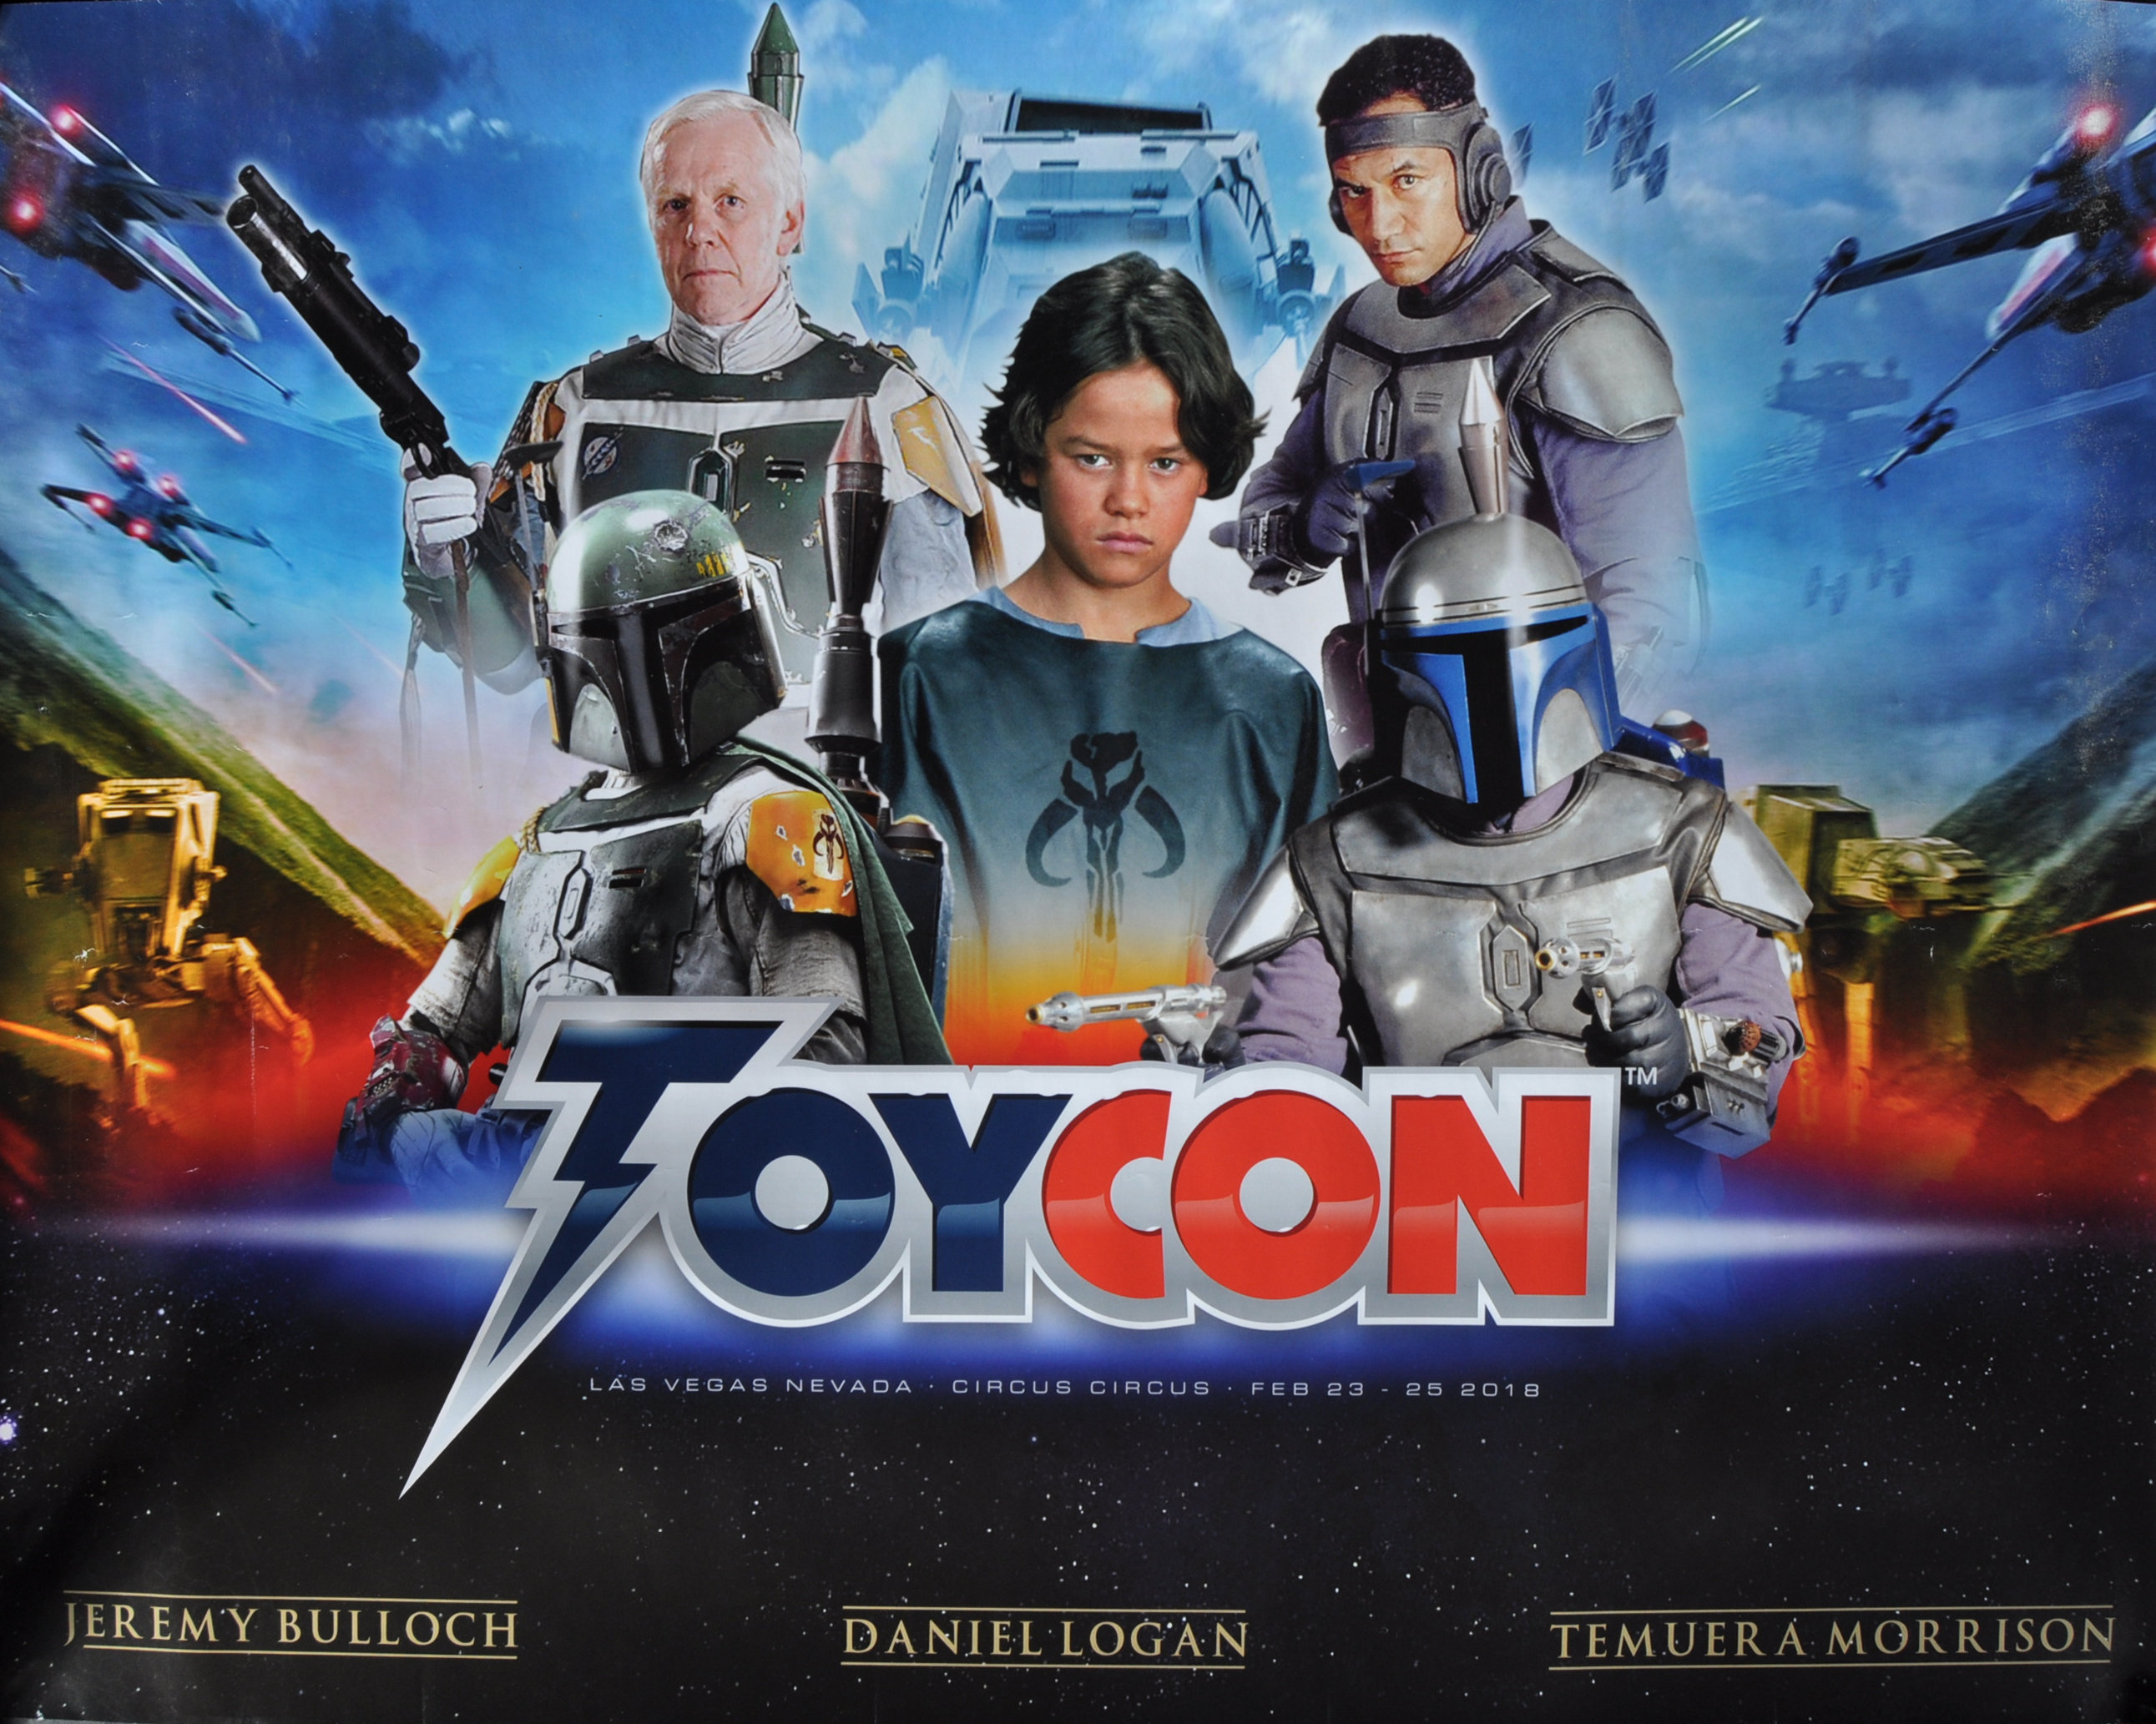 ESTATE OF JEREMY BULLOCH - STAR WARS - CONVENTION POSTERS - Image 14 of 14